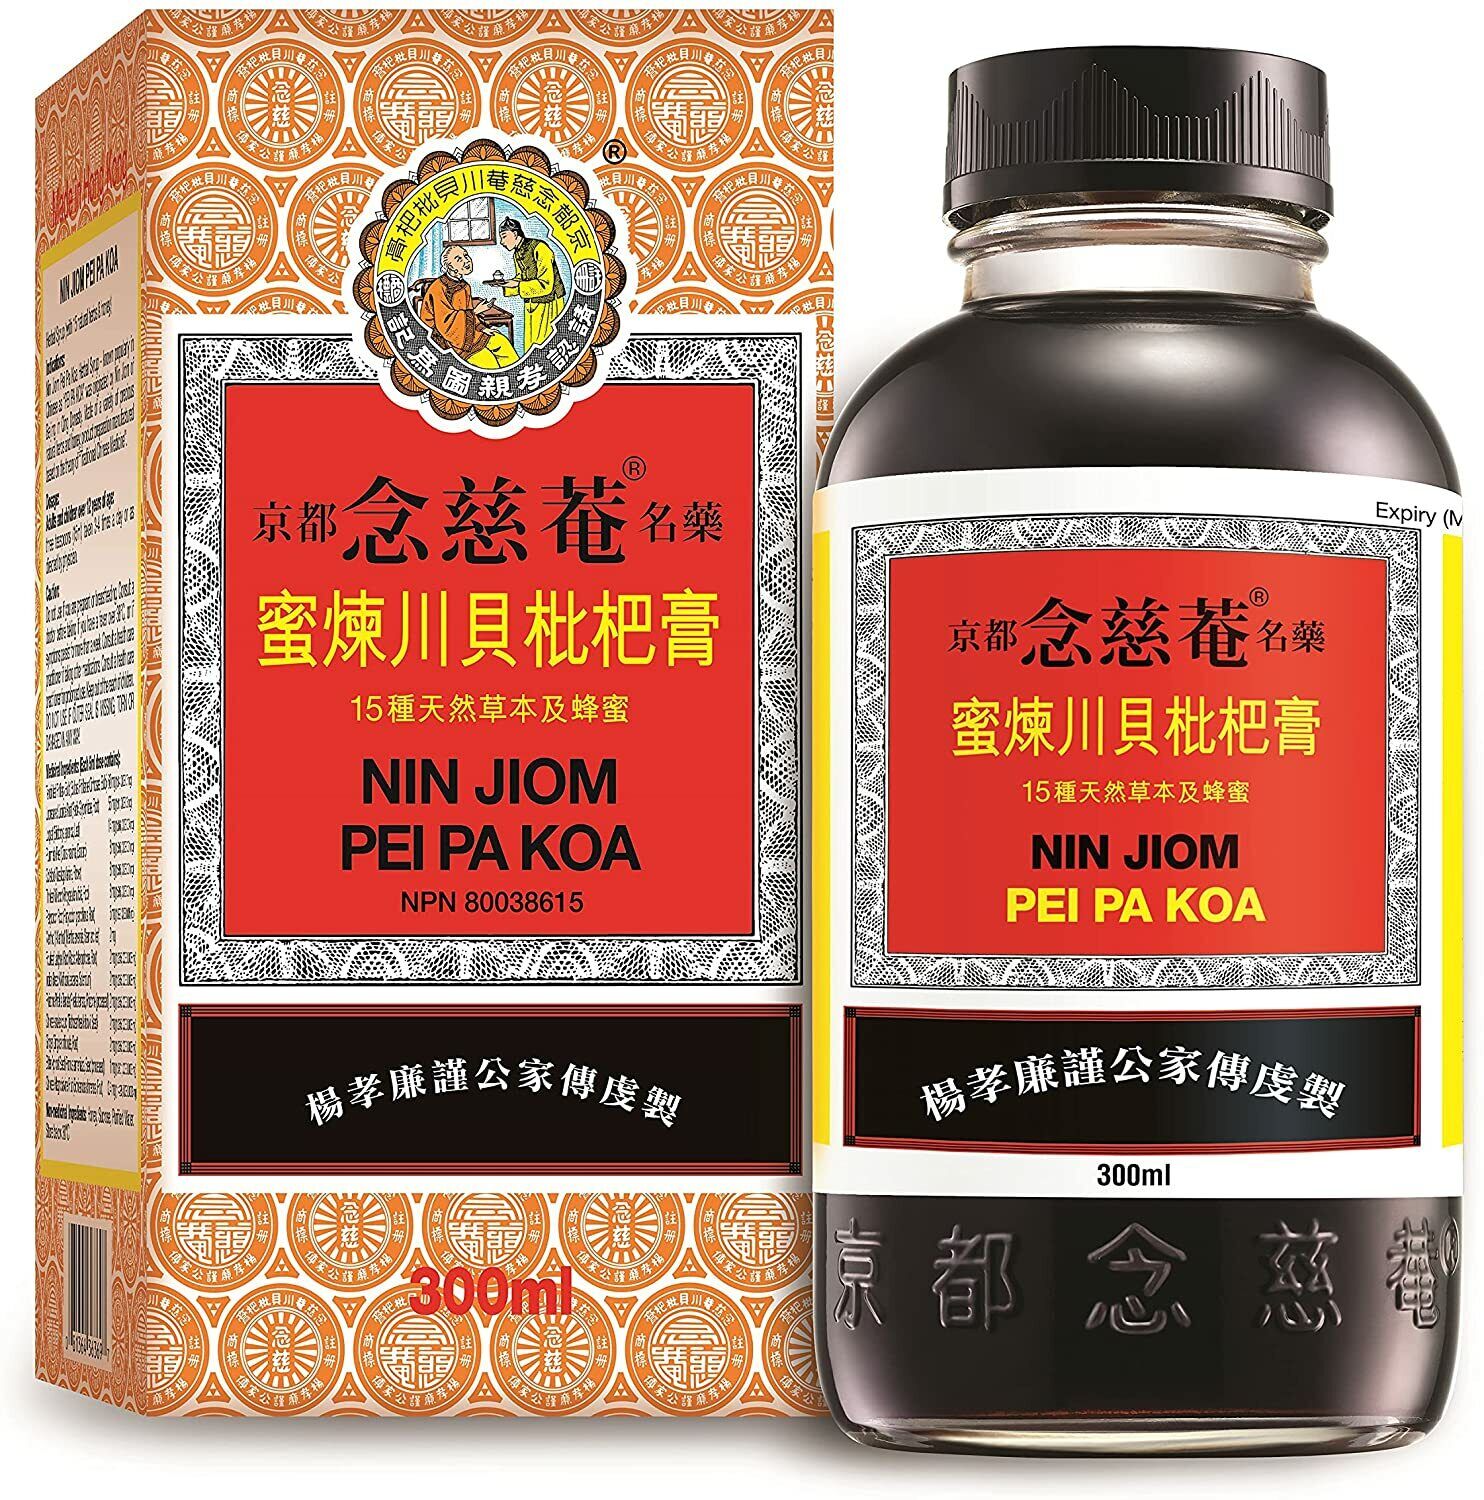 Looking to Buy Nin Jiom Pei Pa Koa. Try Our Top 10 Recommended Brands Near You